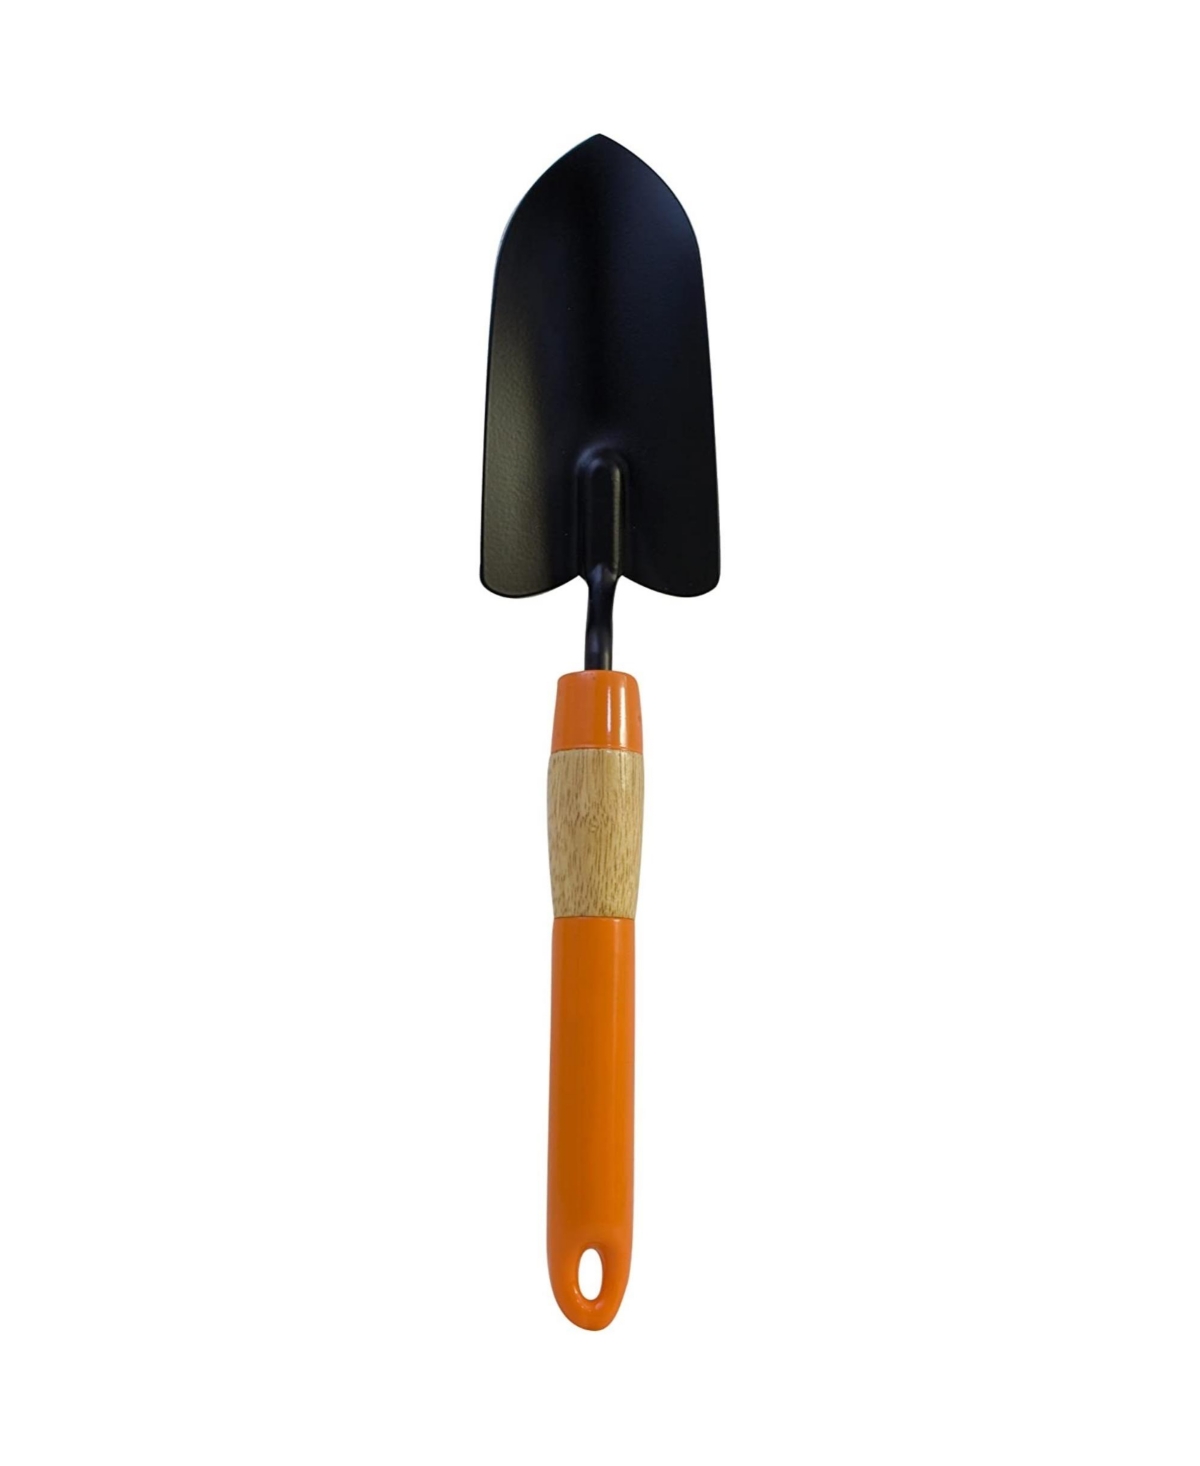 FlexrakeTrowel with Black Powder-Coated Head and Contoured Handle for Gardening - Multi